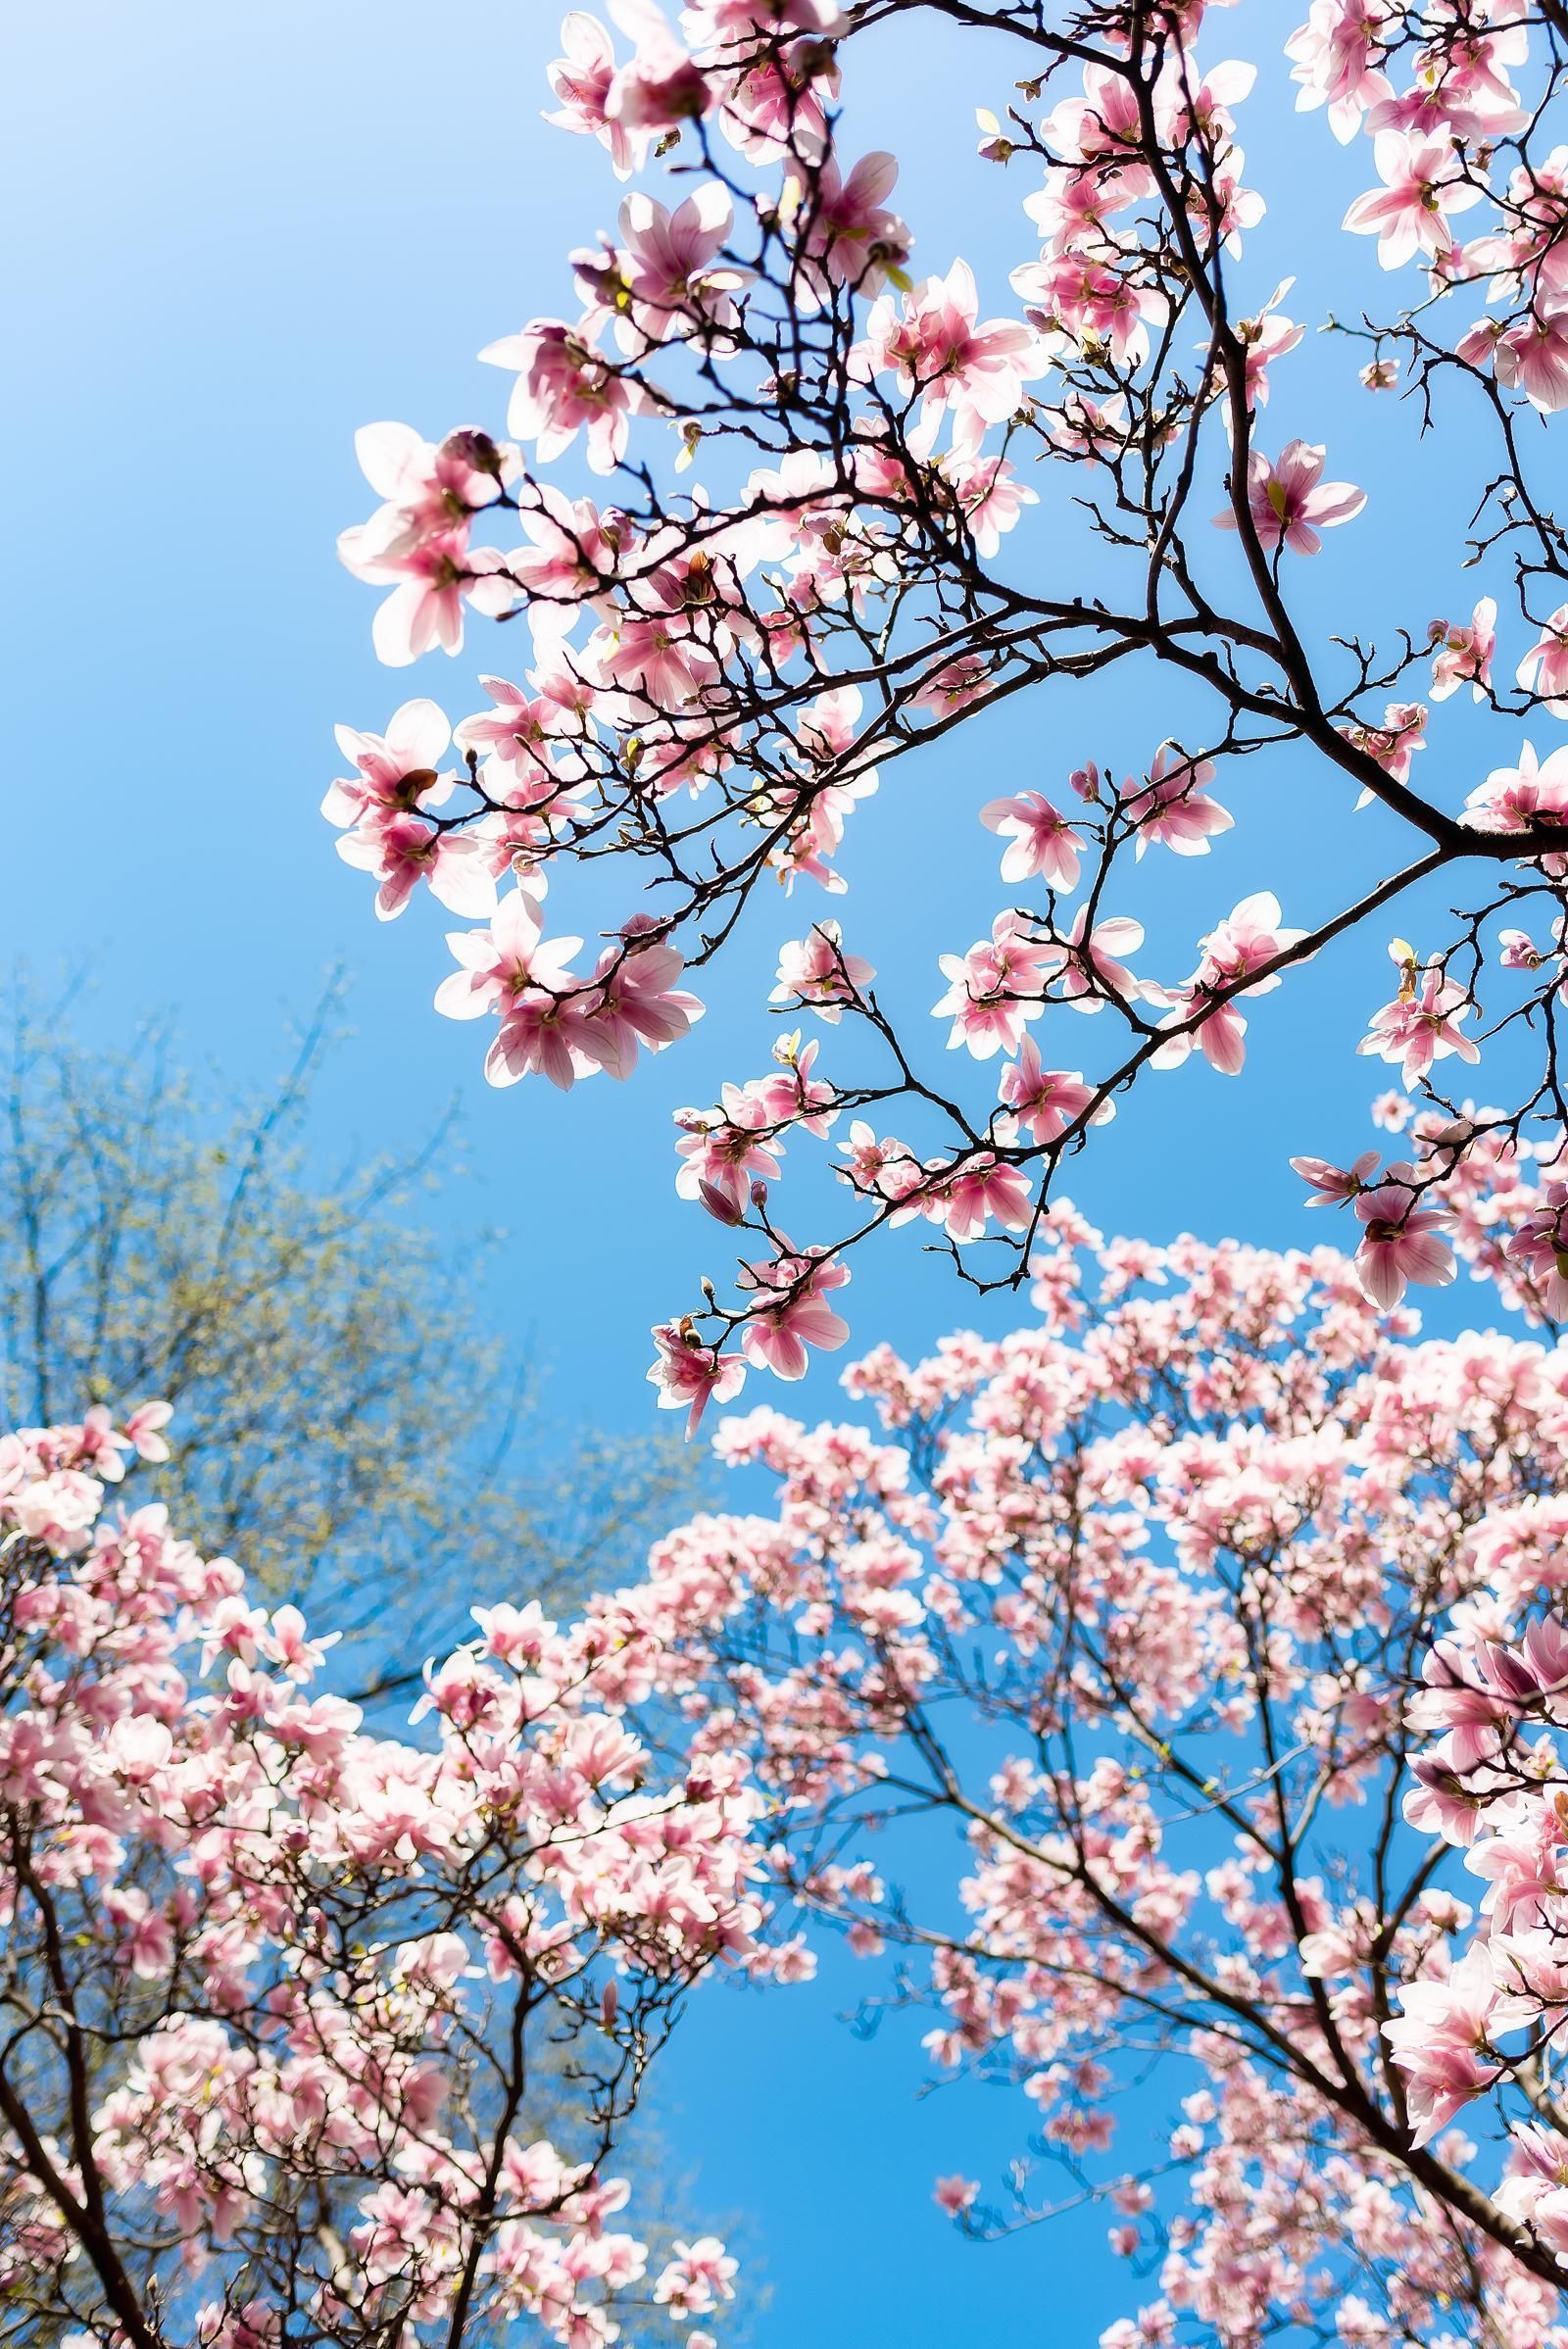 Aesthetic Spring Flowers Wallpapers | HD Background Images | Photos |  Pictures – YL Computing